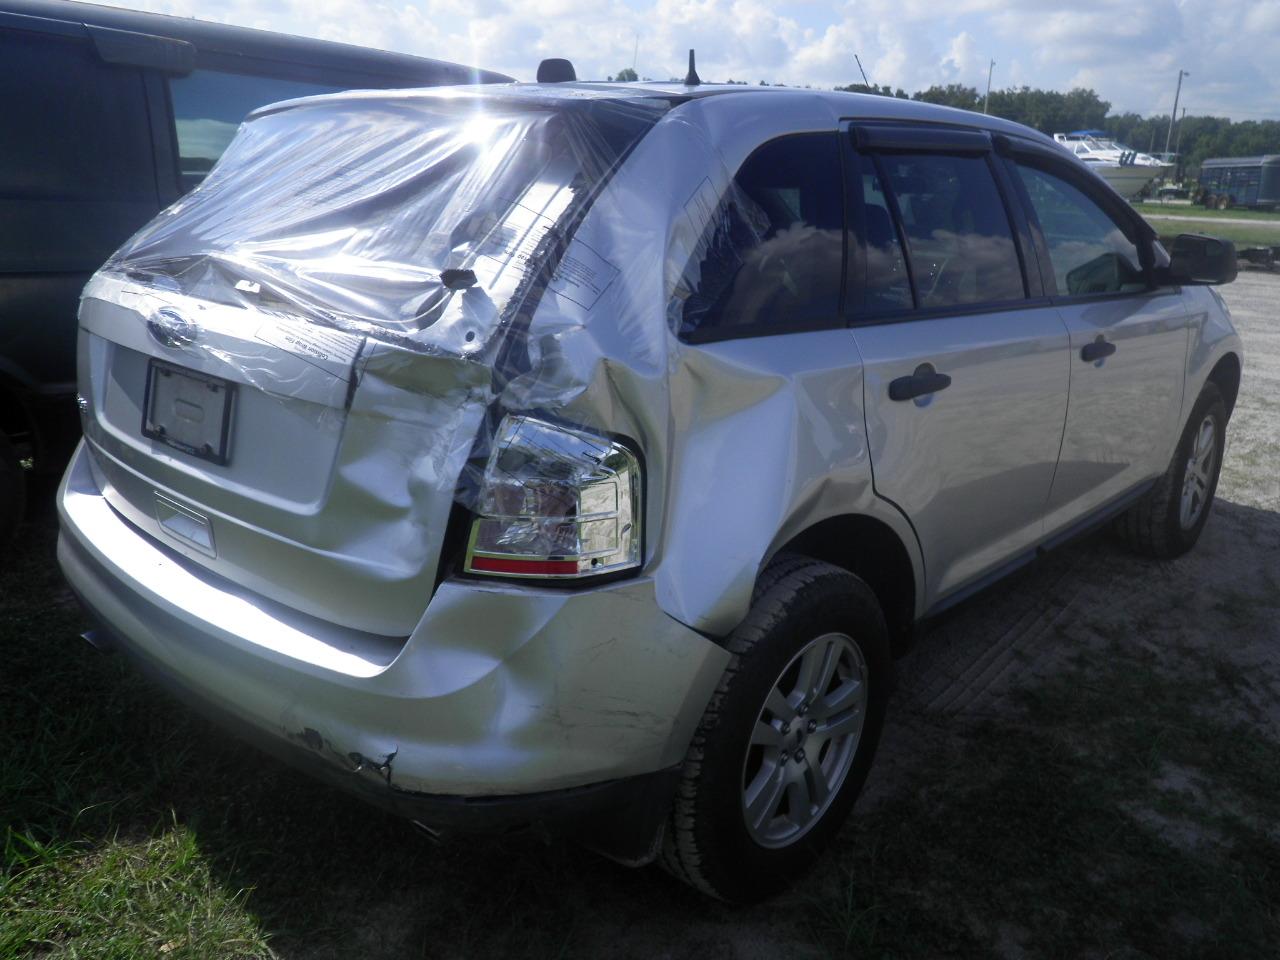 7-05153 (Cars-SUV 4D)  Seller: Florida State FWC 2010 FORD EDGE